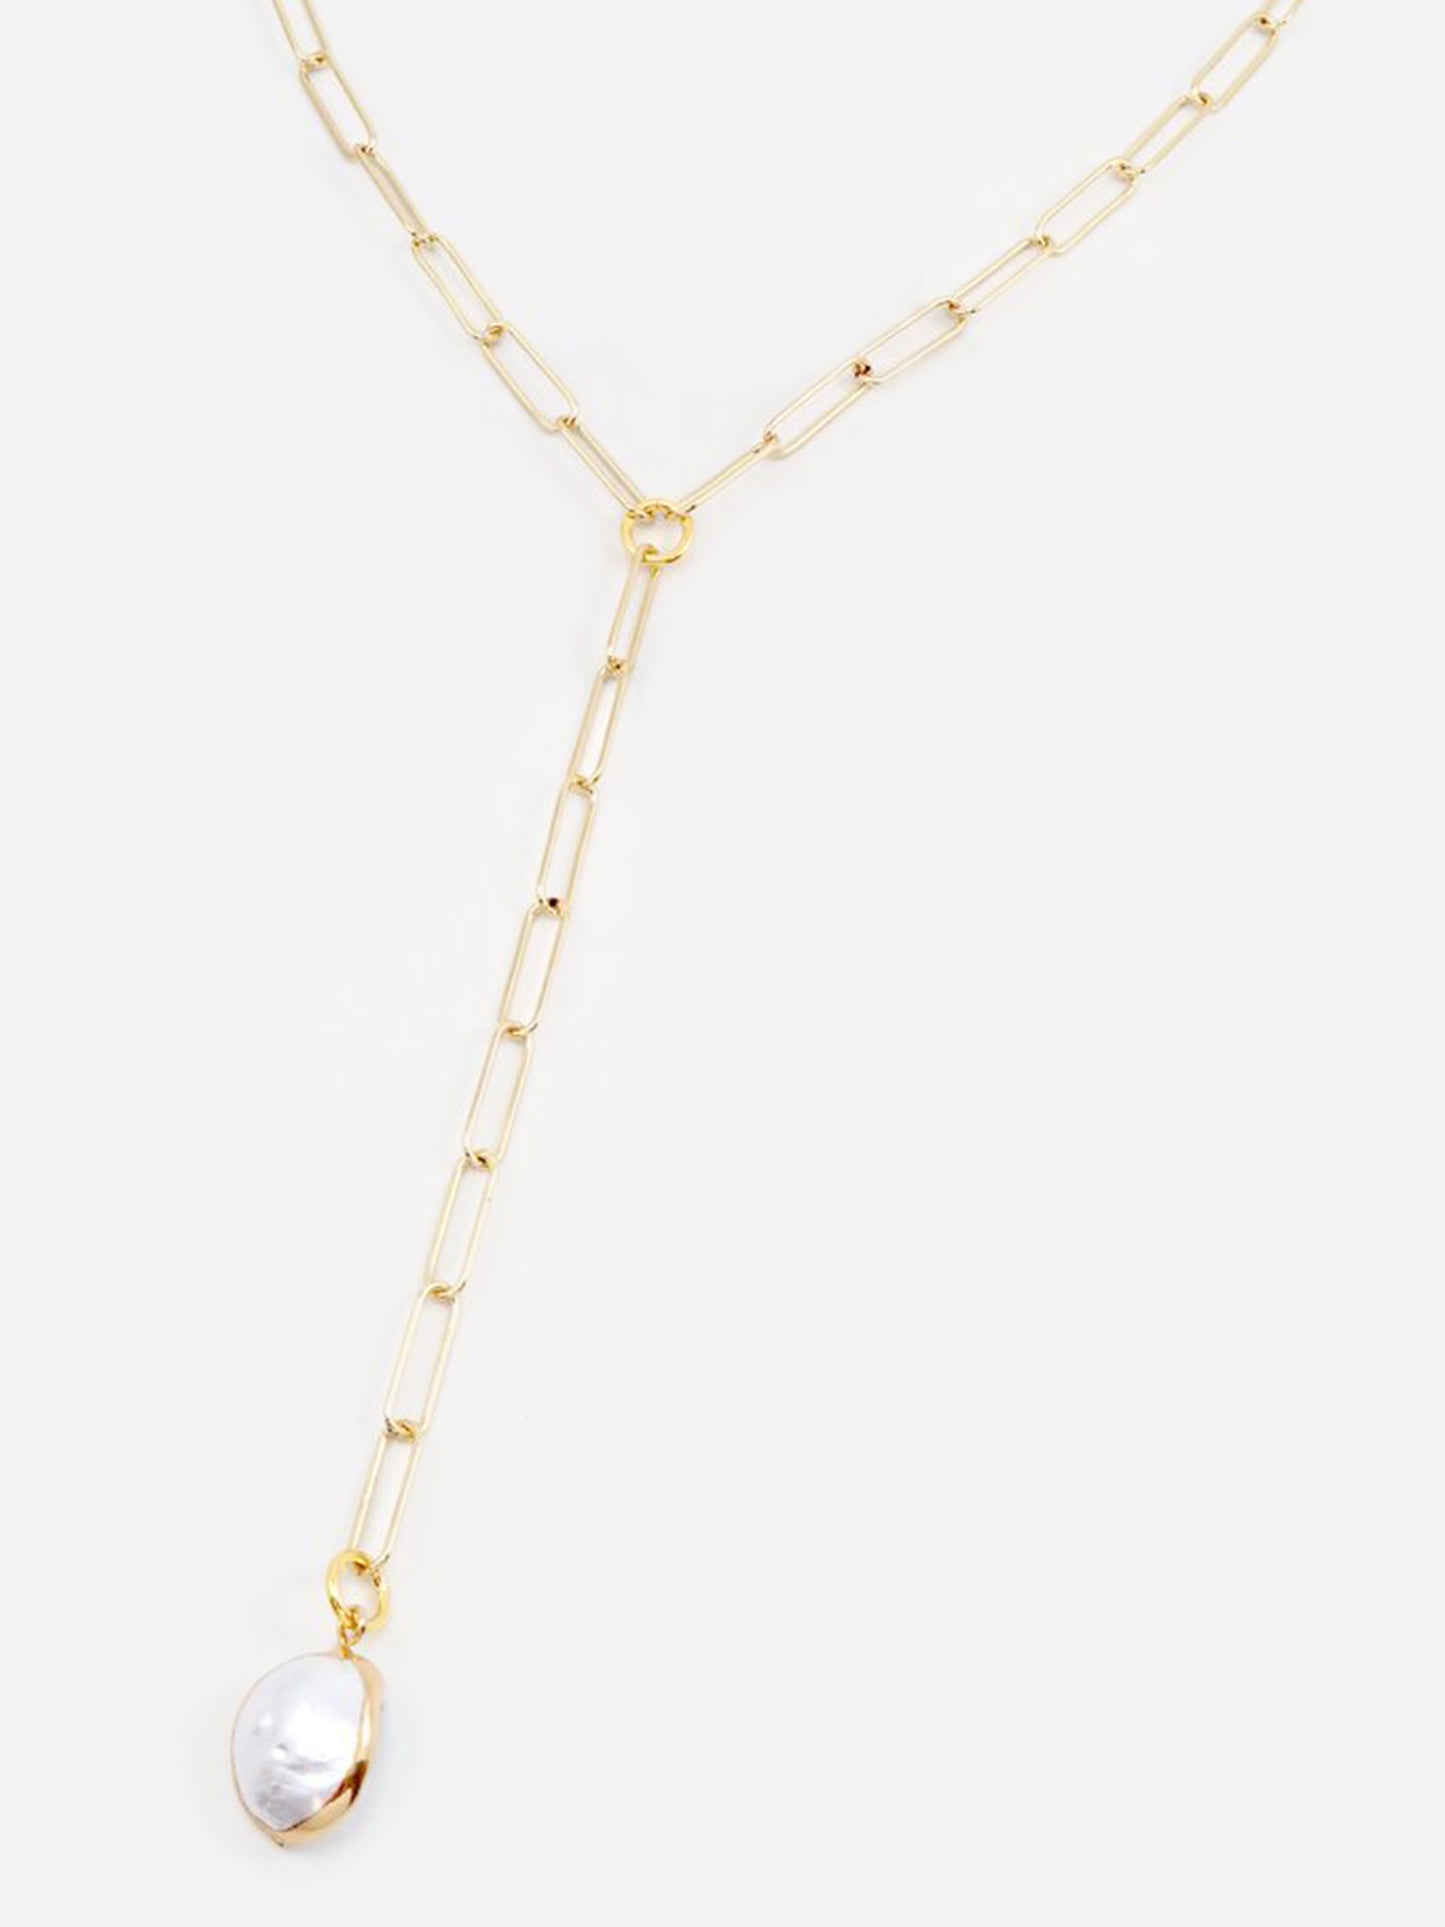 Nicole Leigh Jewelry Marcy Necklace